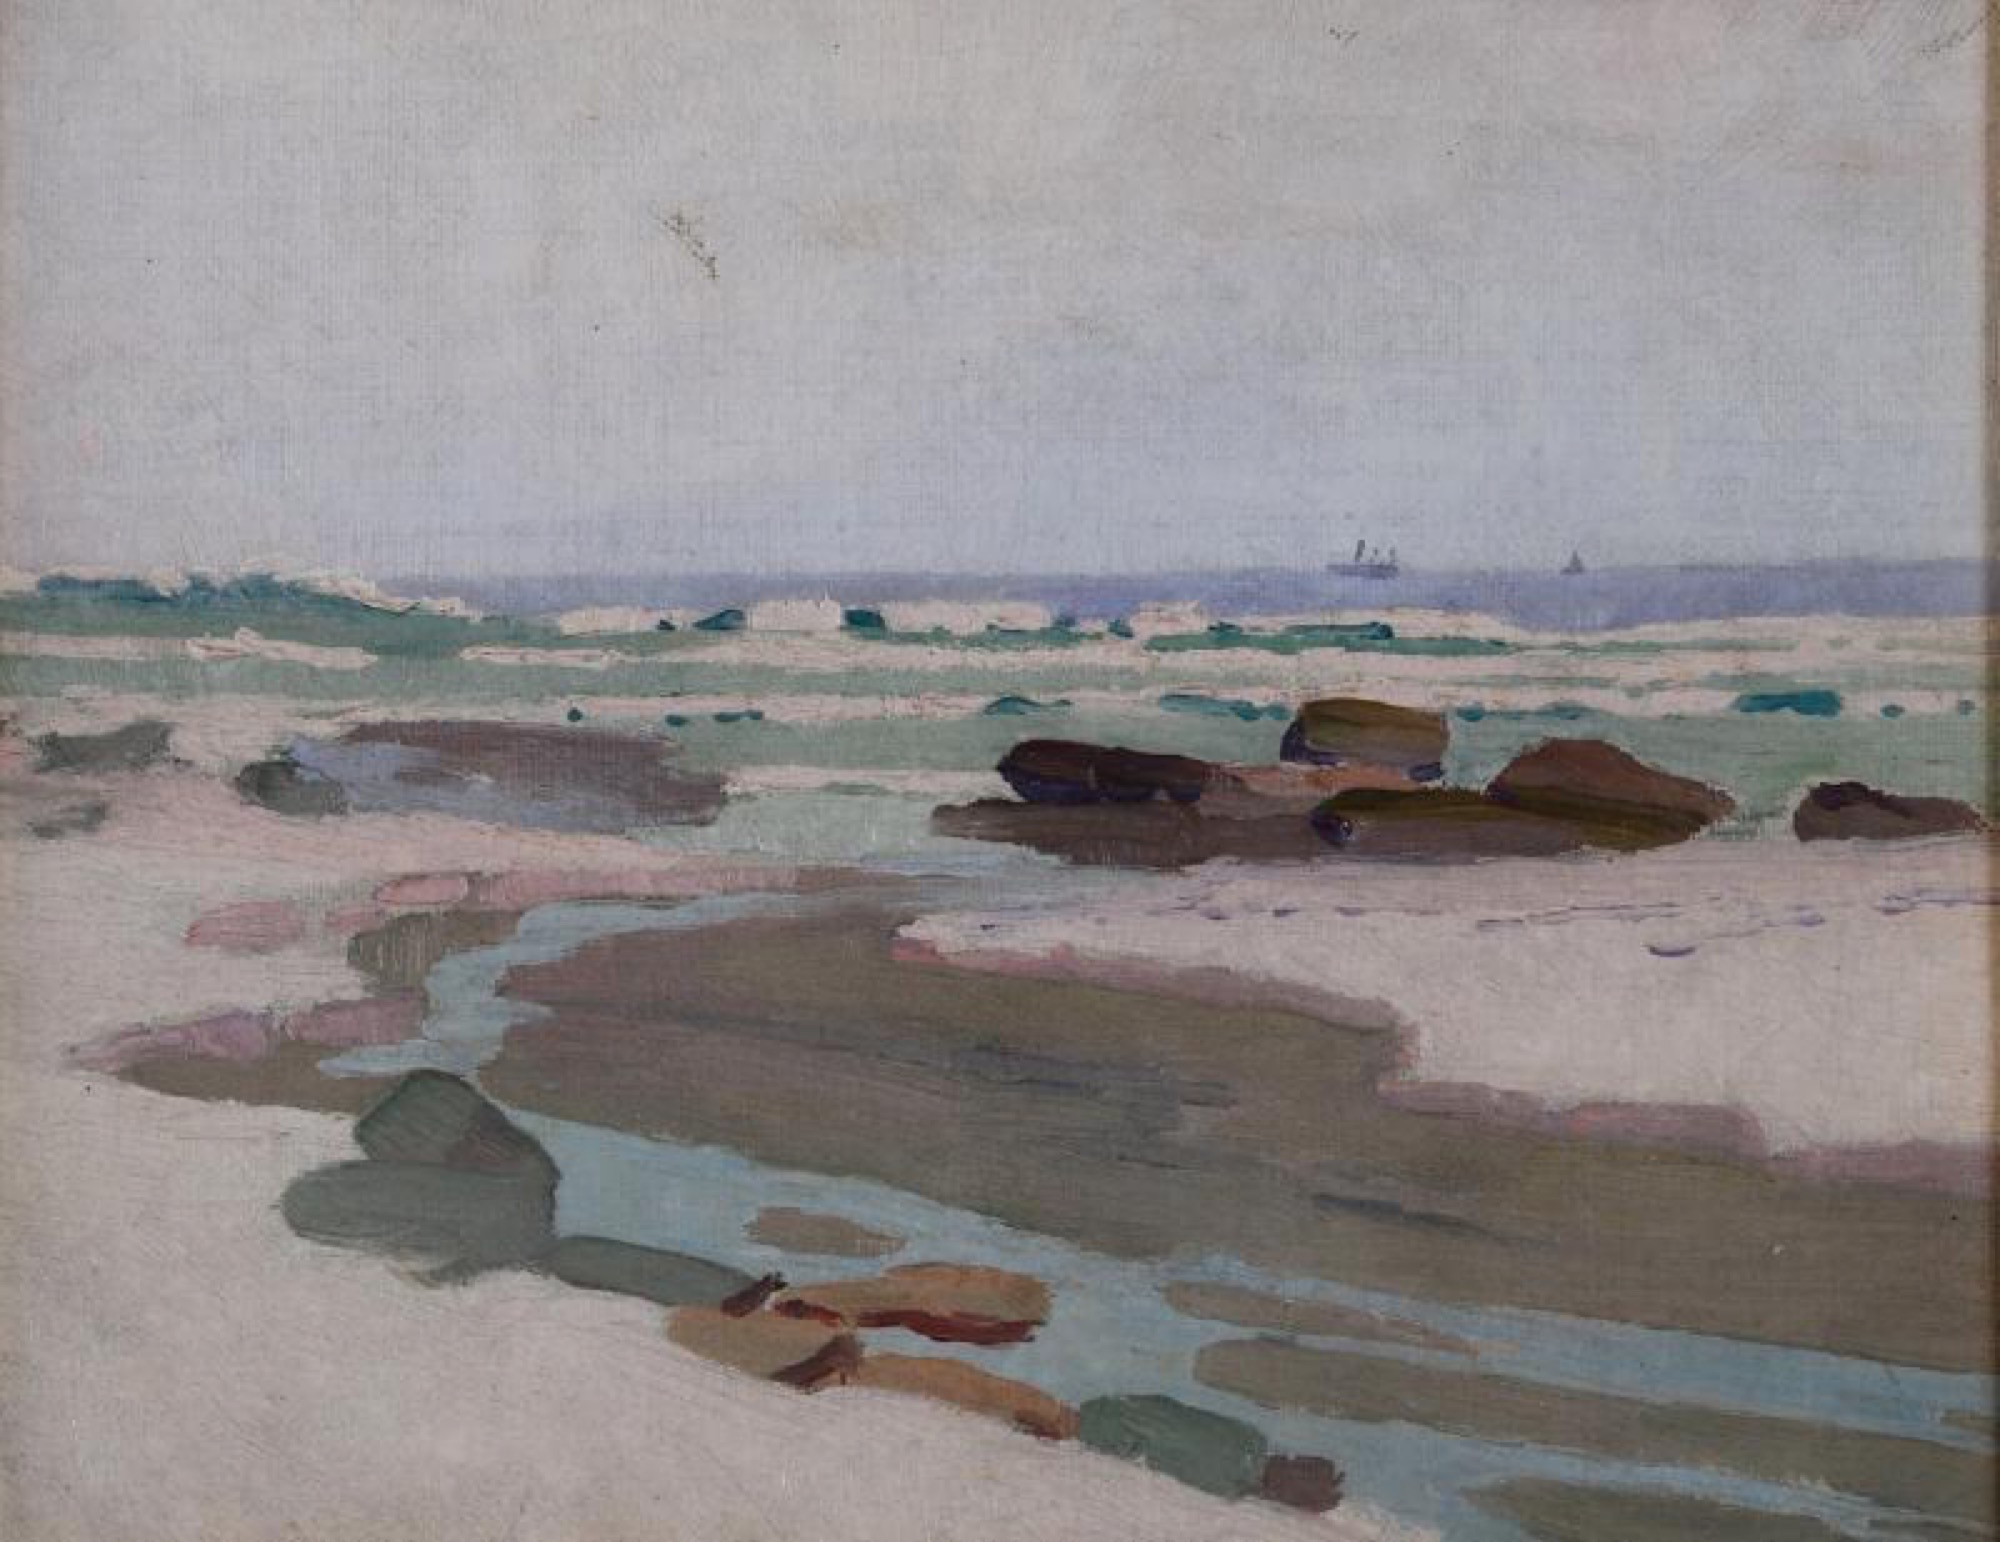 Sophie Steffanoni, <em>Beach Scene</em>, c. 1905. Wollongong Art Gallery, The George and Nerissa Johnson Memorial Bequest, purchased 1996.